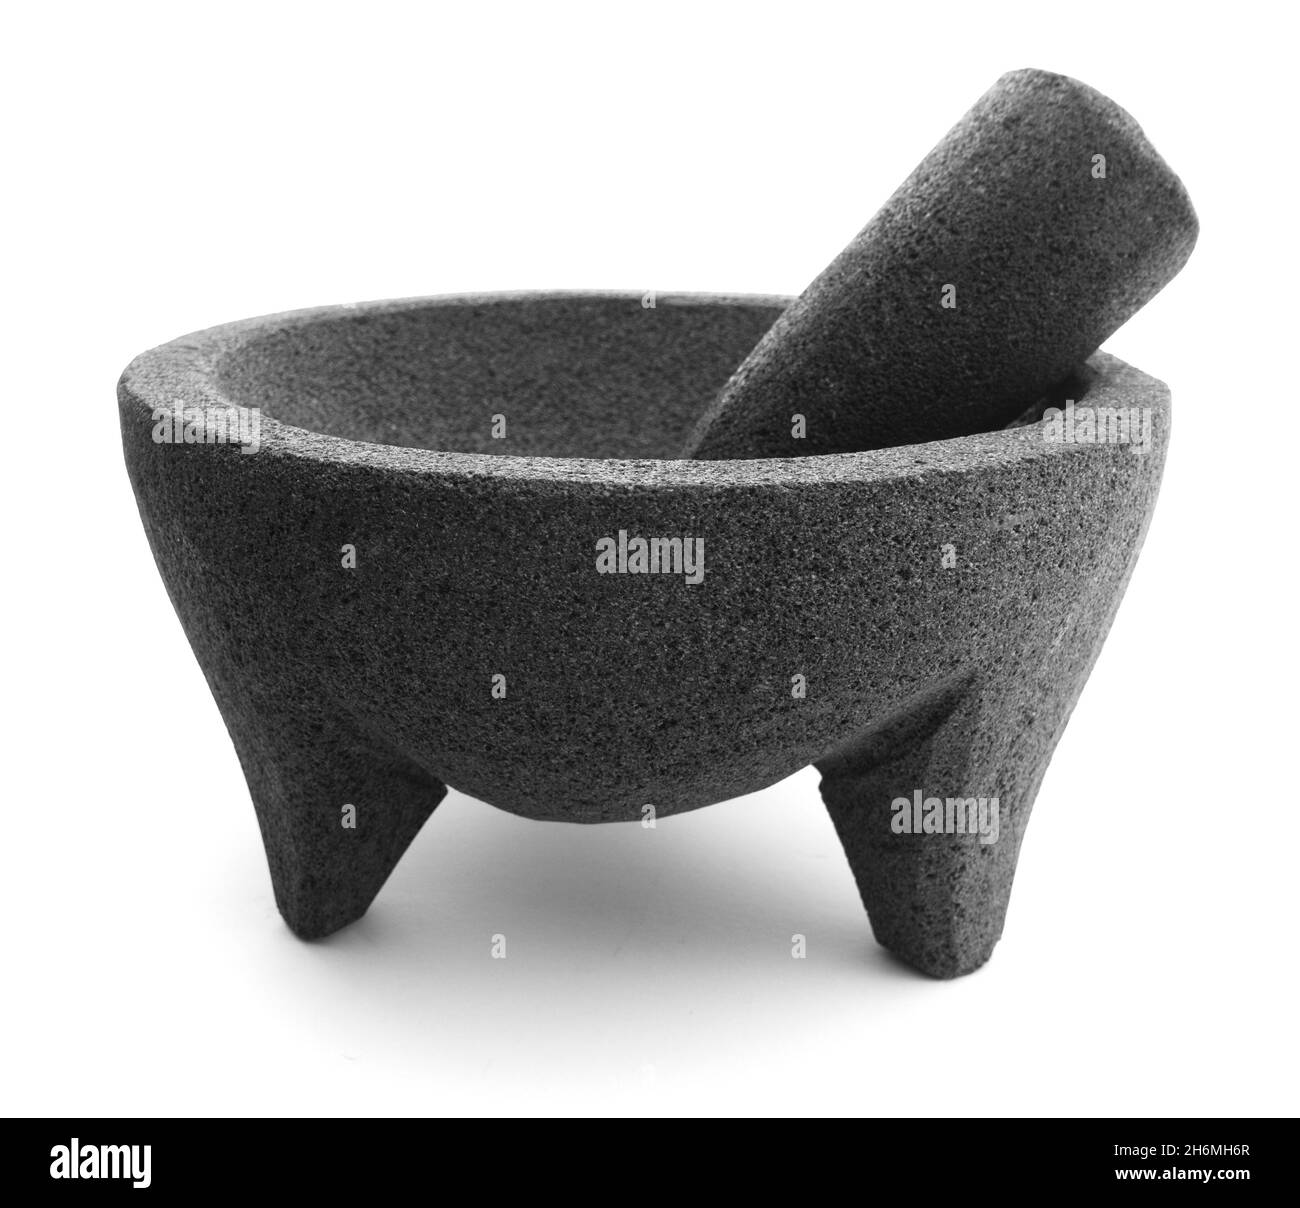 https://c8.alamy.com/comp/2H6MH6R/isolated-molcajete-bowl-on-white-2H6MH6R.jpg